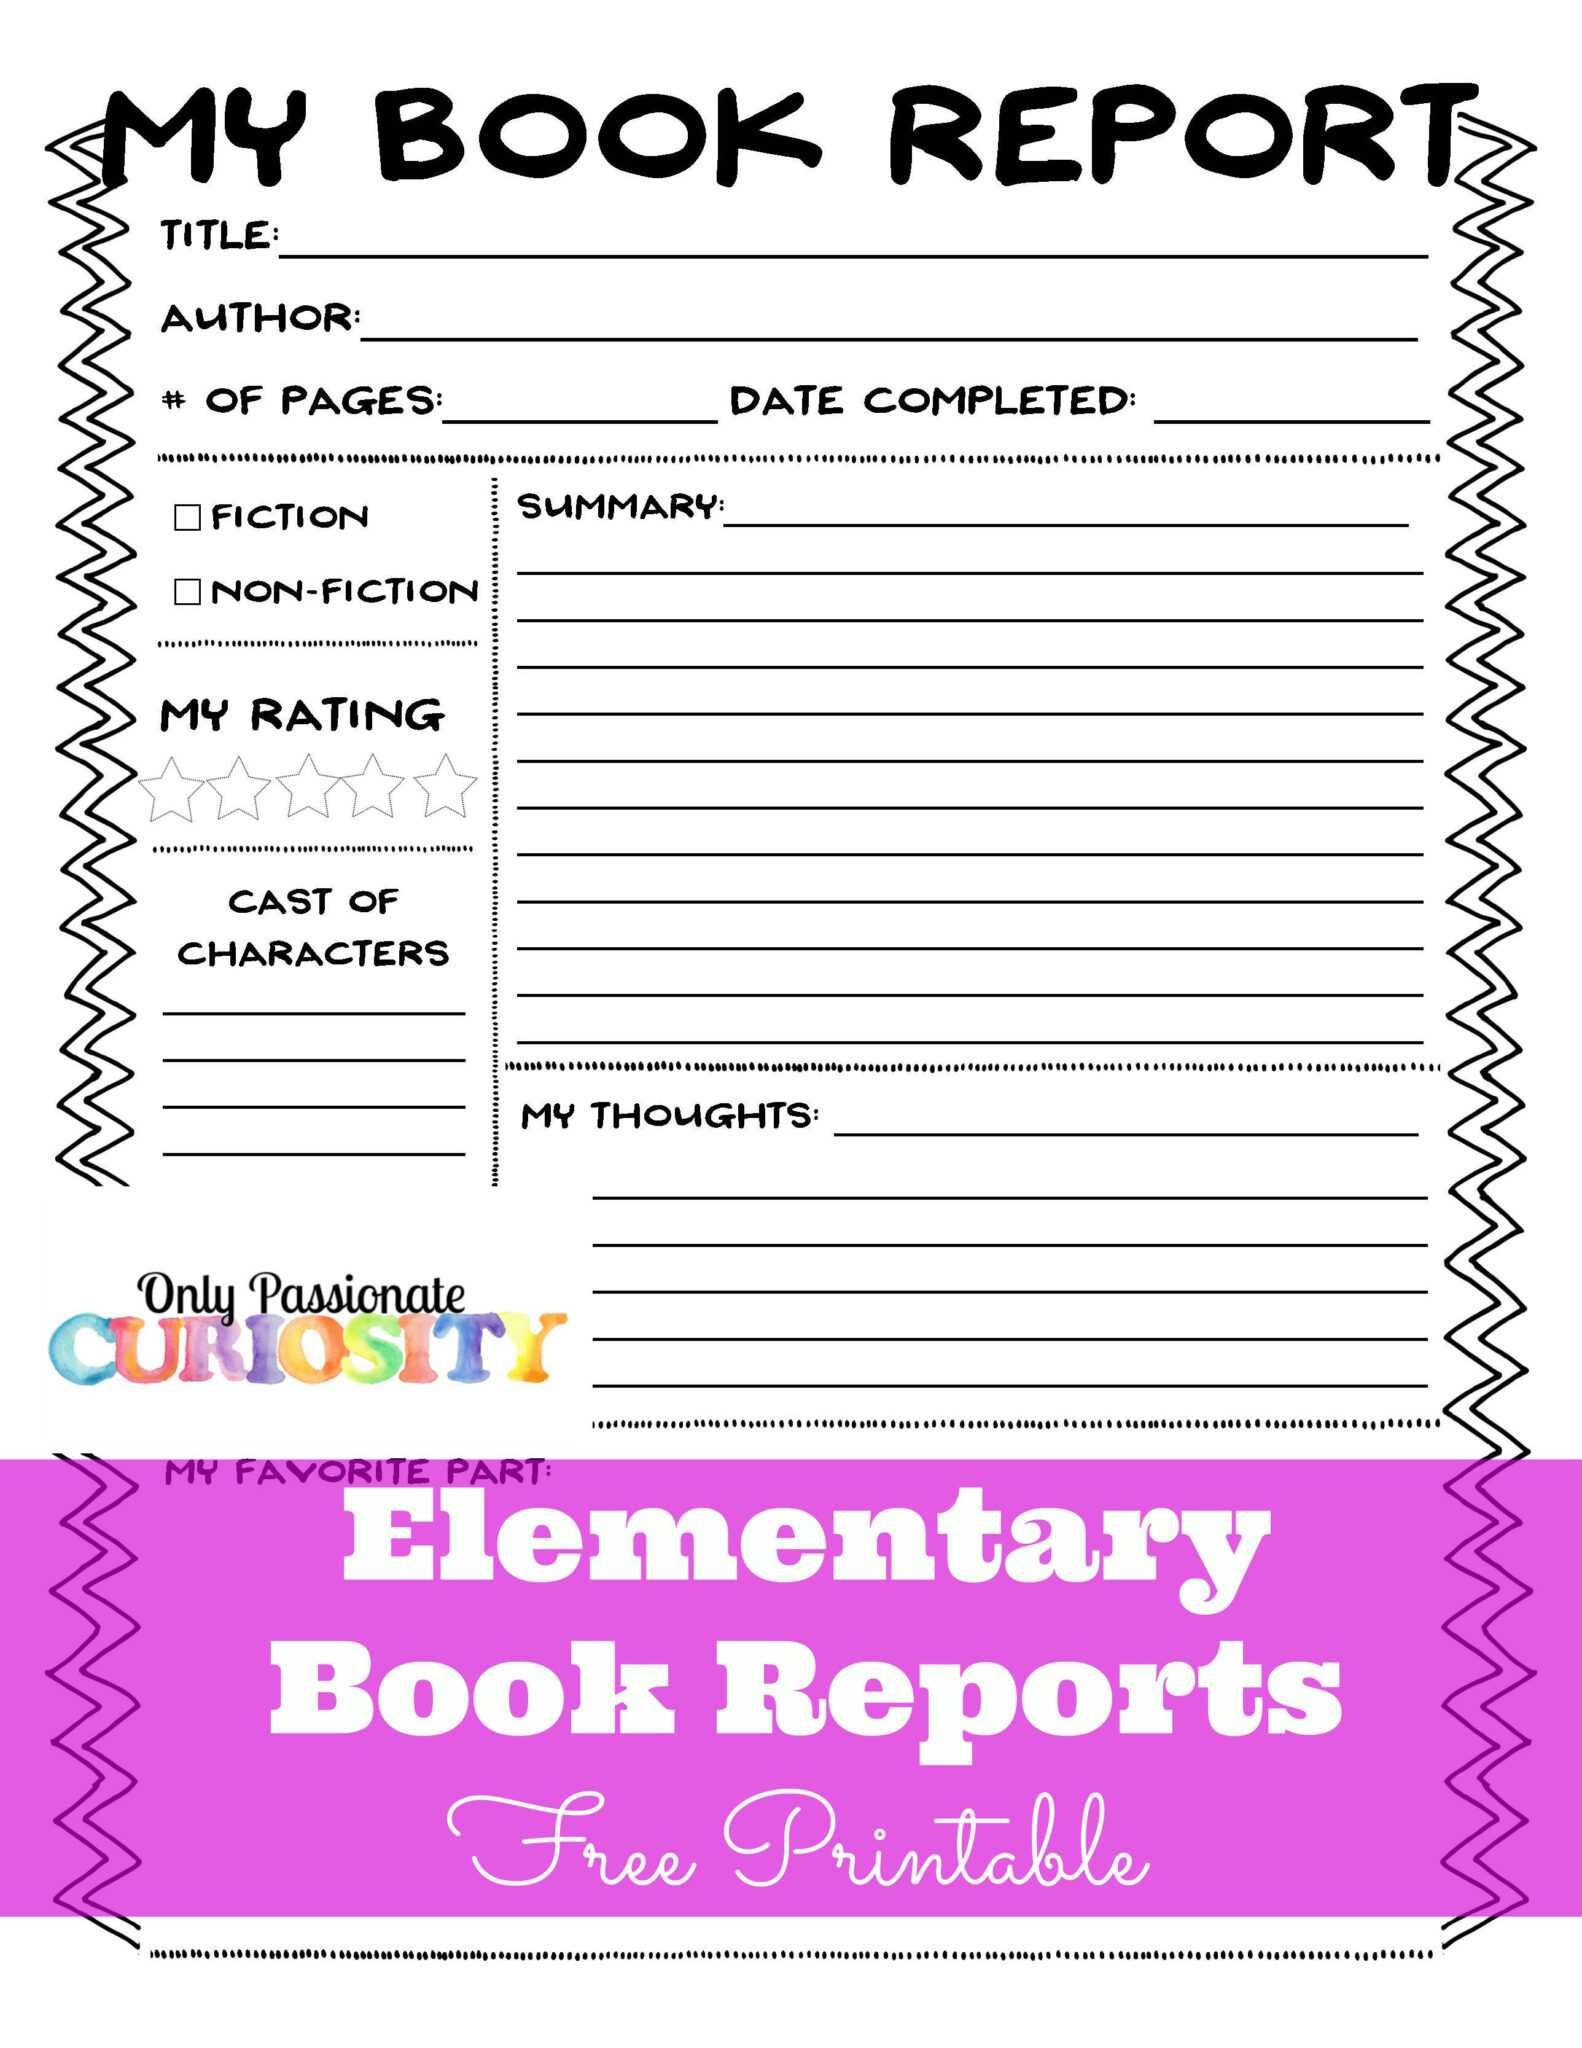 Creative Book Report Template Intended For Sandwich Book Report Printable Template